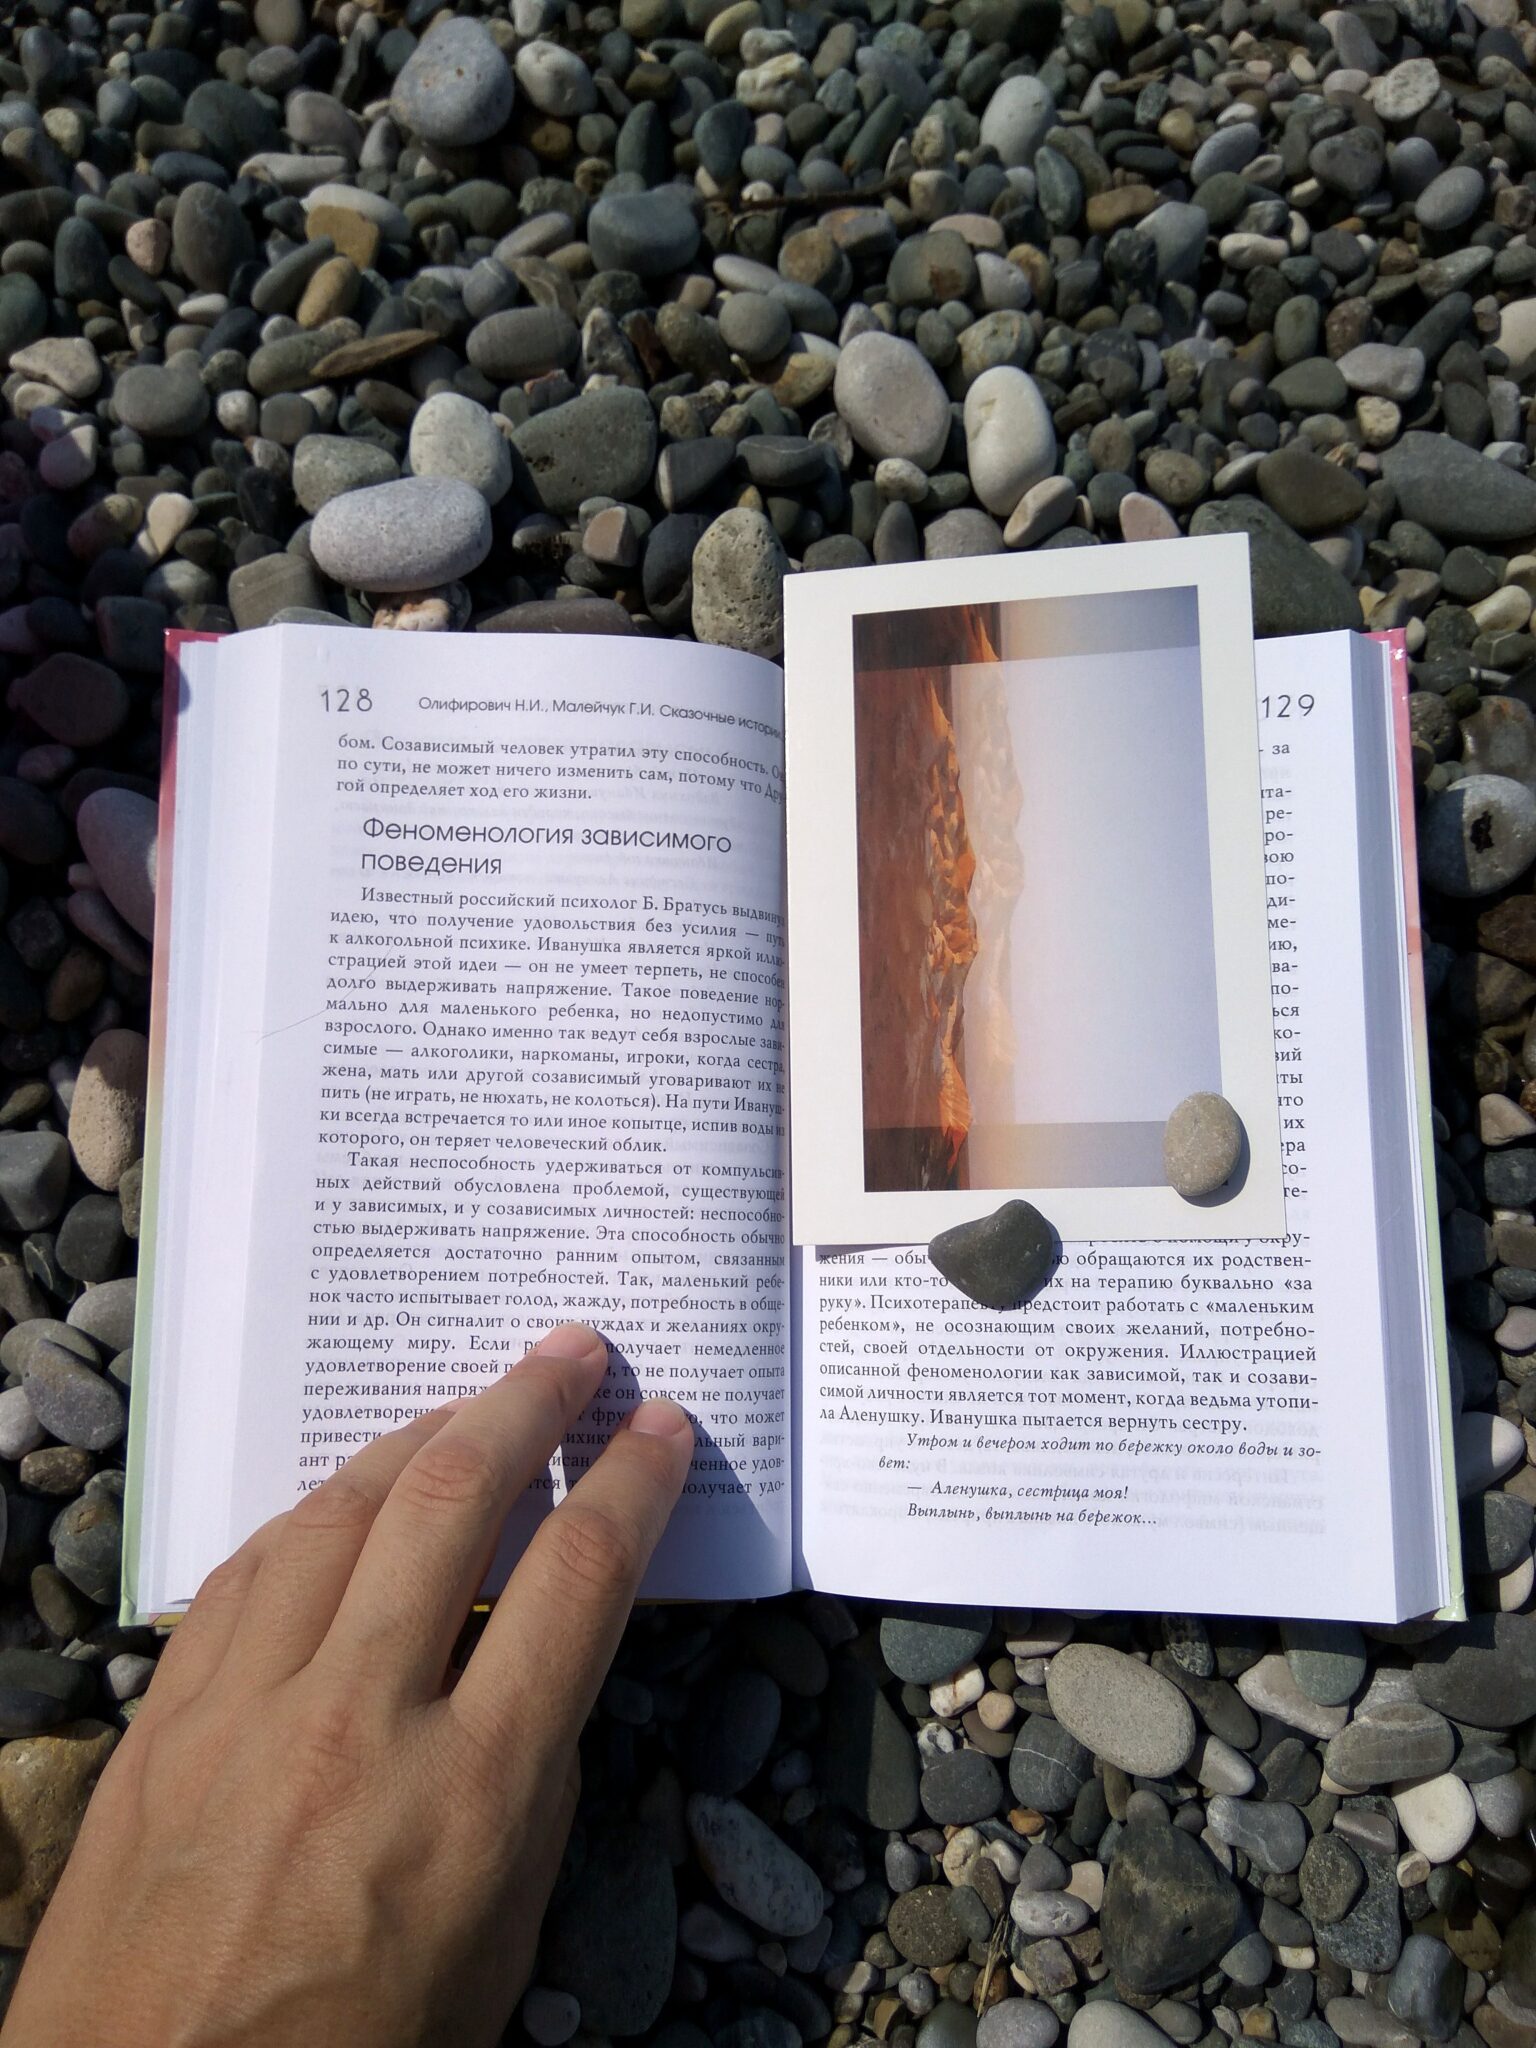 Transliteration is part of a wider translation strategy.

Description: A Russian book, open to a page with a bookmark, on a pebble stone beach with a hand holding it open.